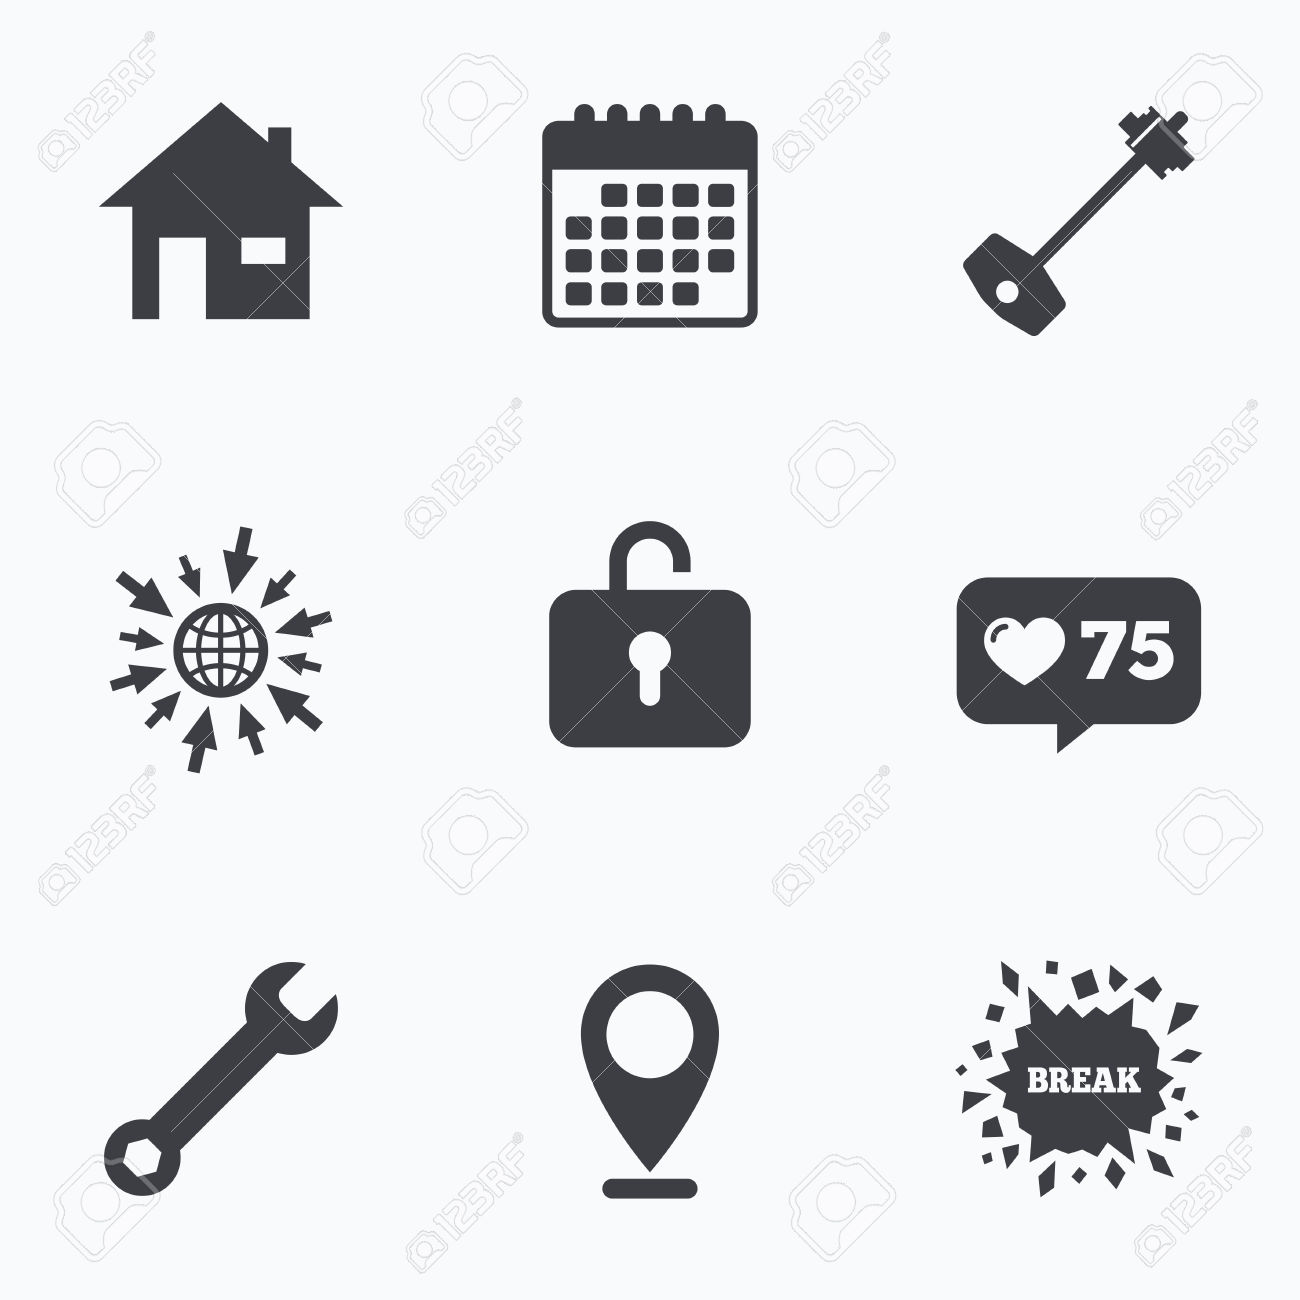 Calendar, Like Counter And Go To Web Icons. Home Key Icon. Wrench.